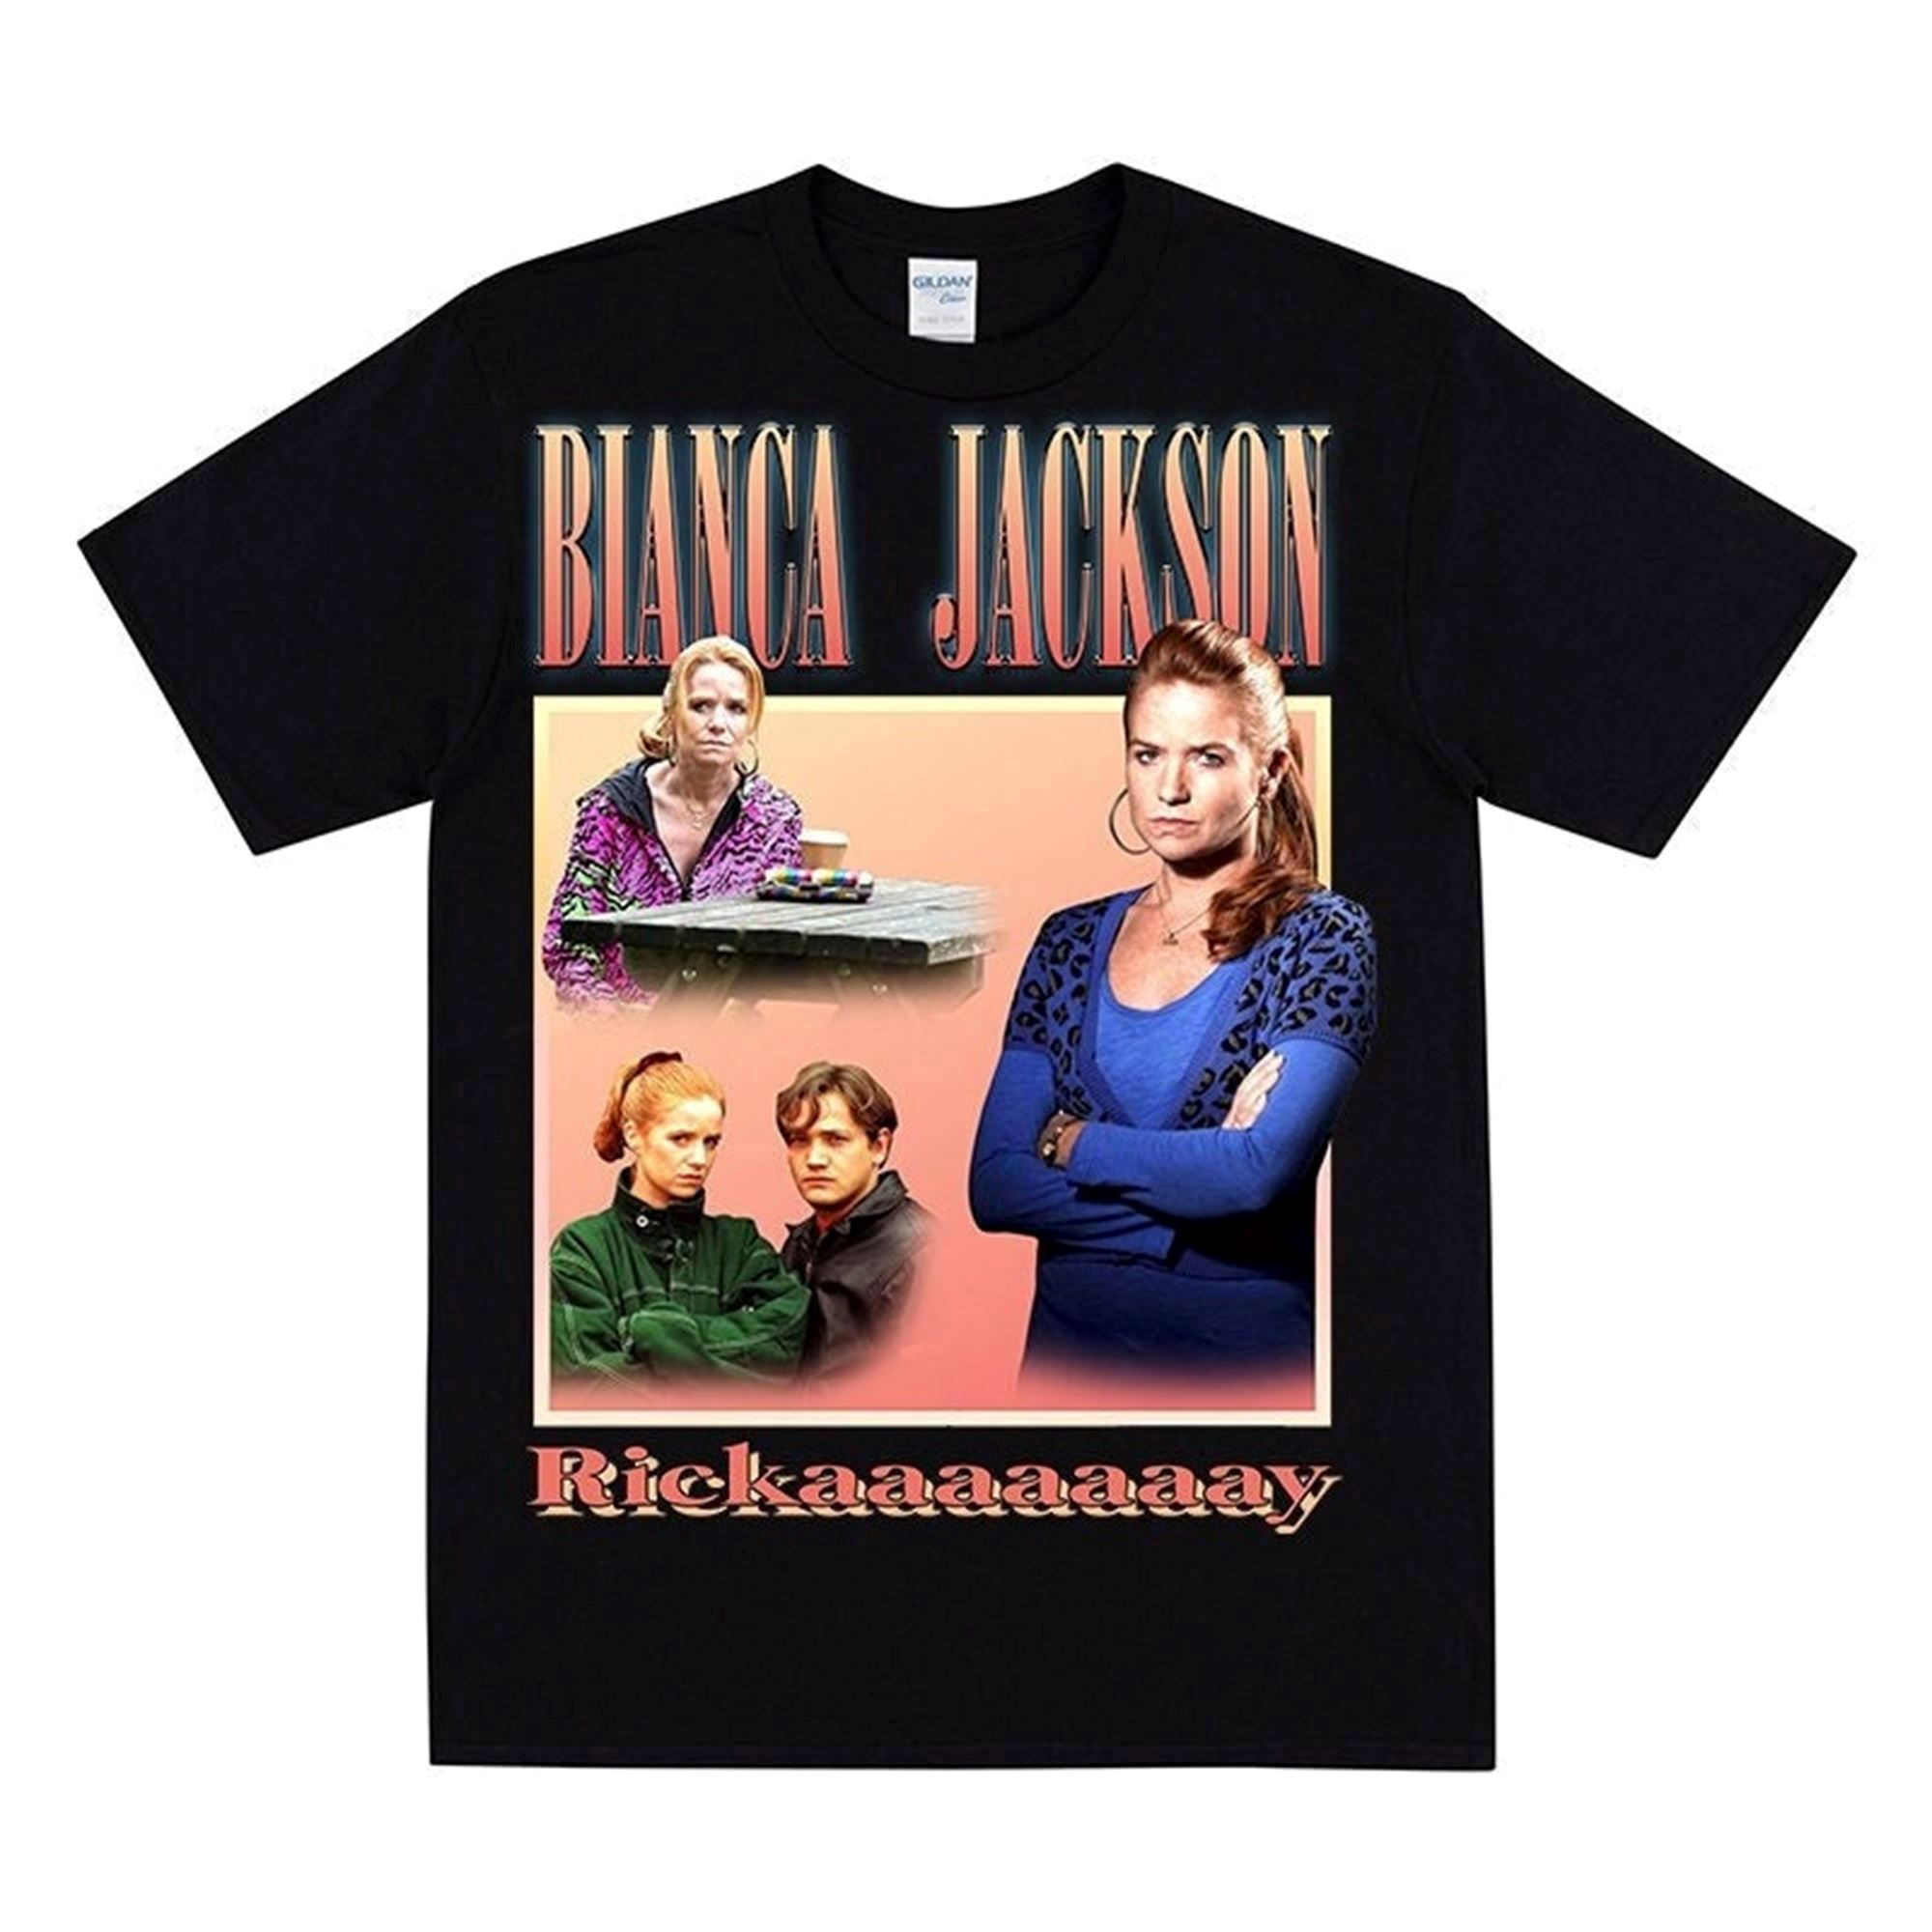 Interesting Bianca Jackson Homage T-shirt 90s Eastenders Fans British Soap Opera Theme English Tv Humour Working Class Character 